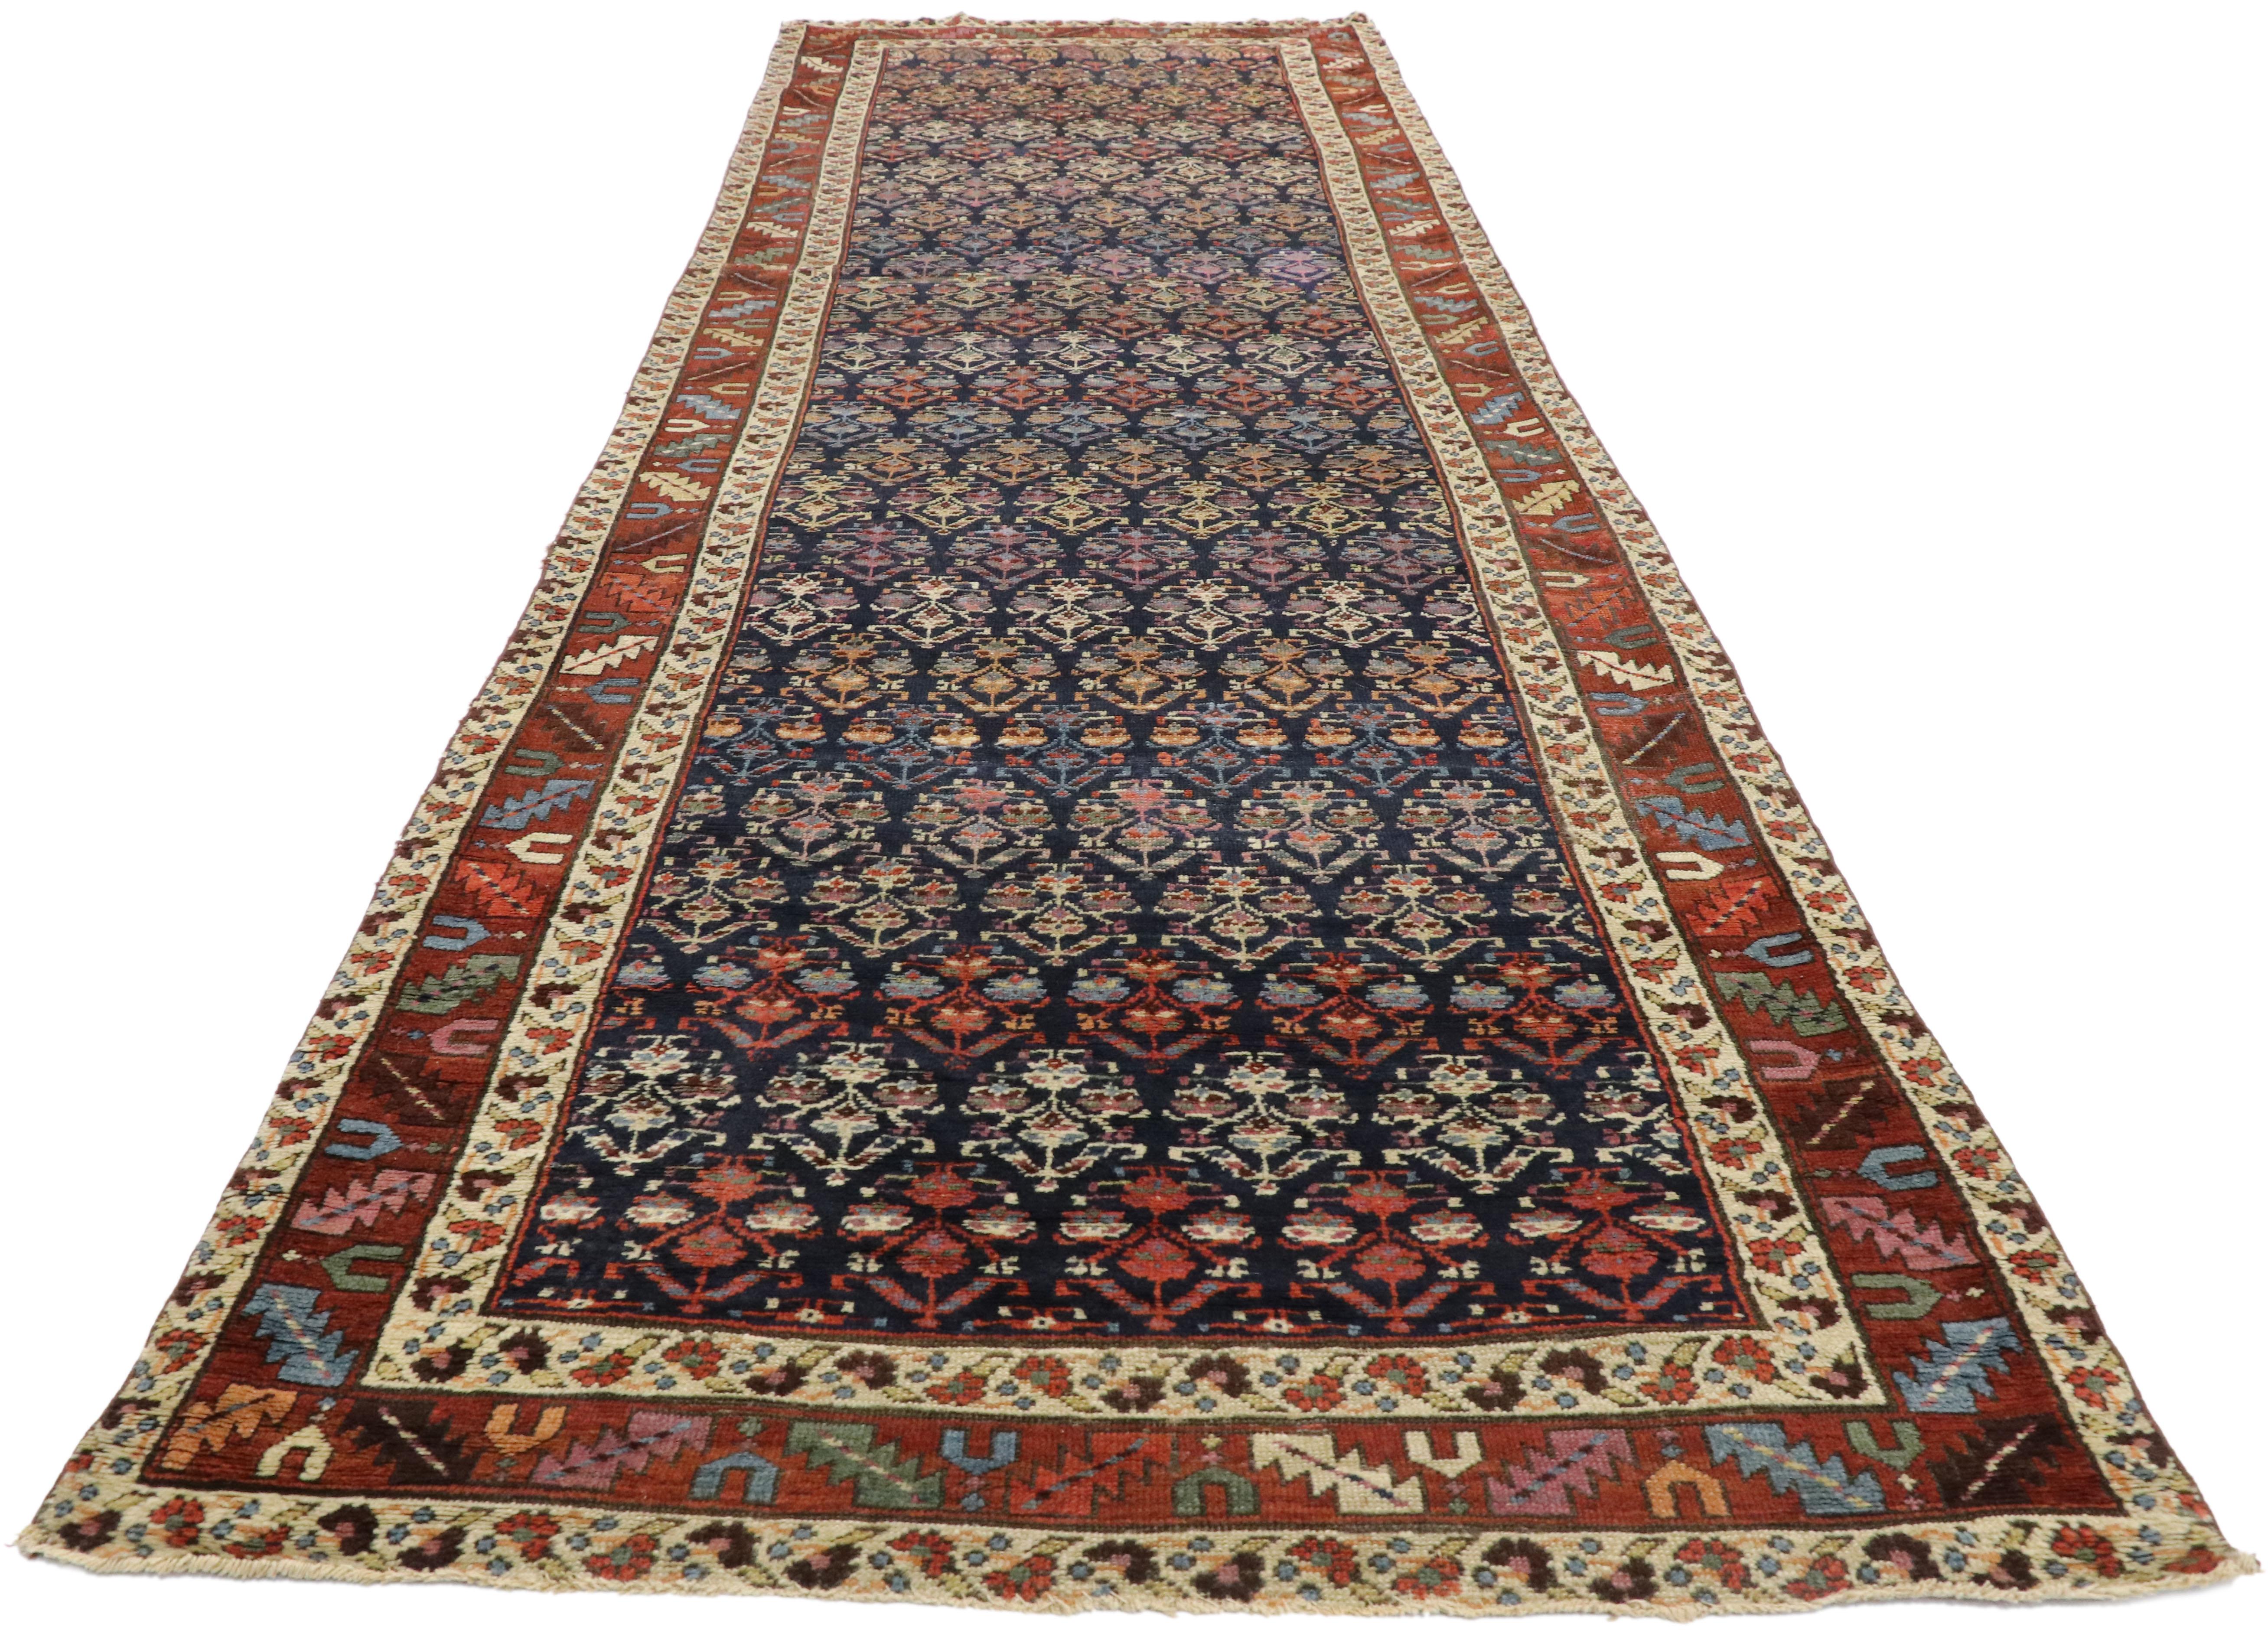 Kazak Antique Caucasian Shirvan Runner with Boteh Pattern and Modern Federal Style For Sale